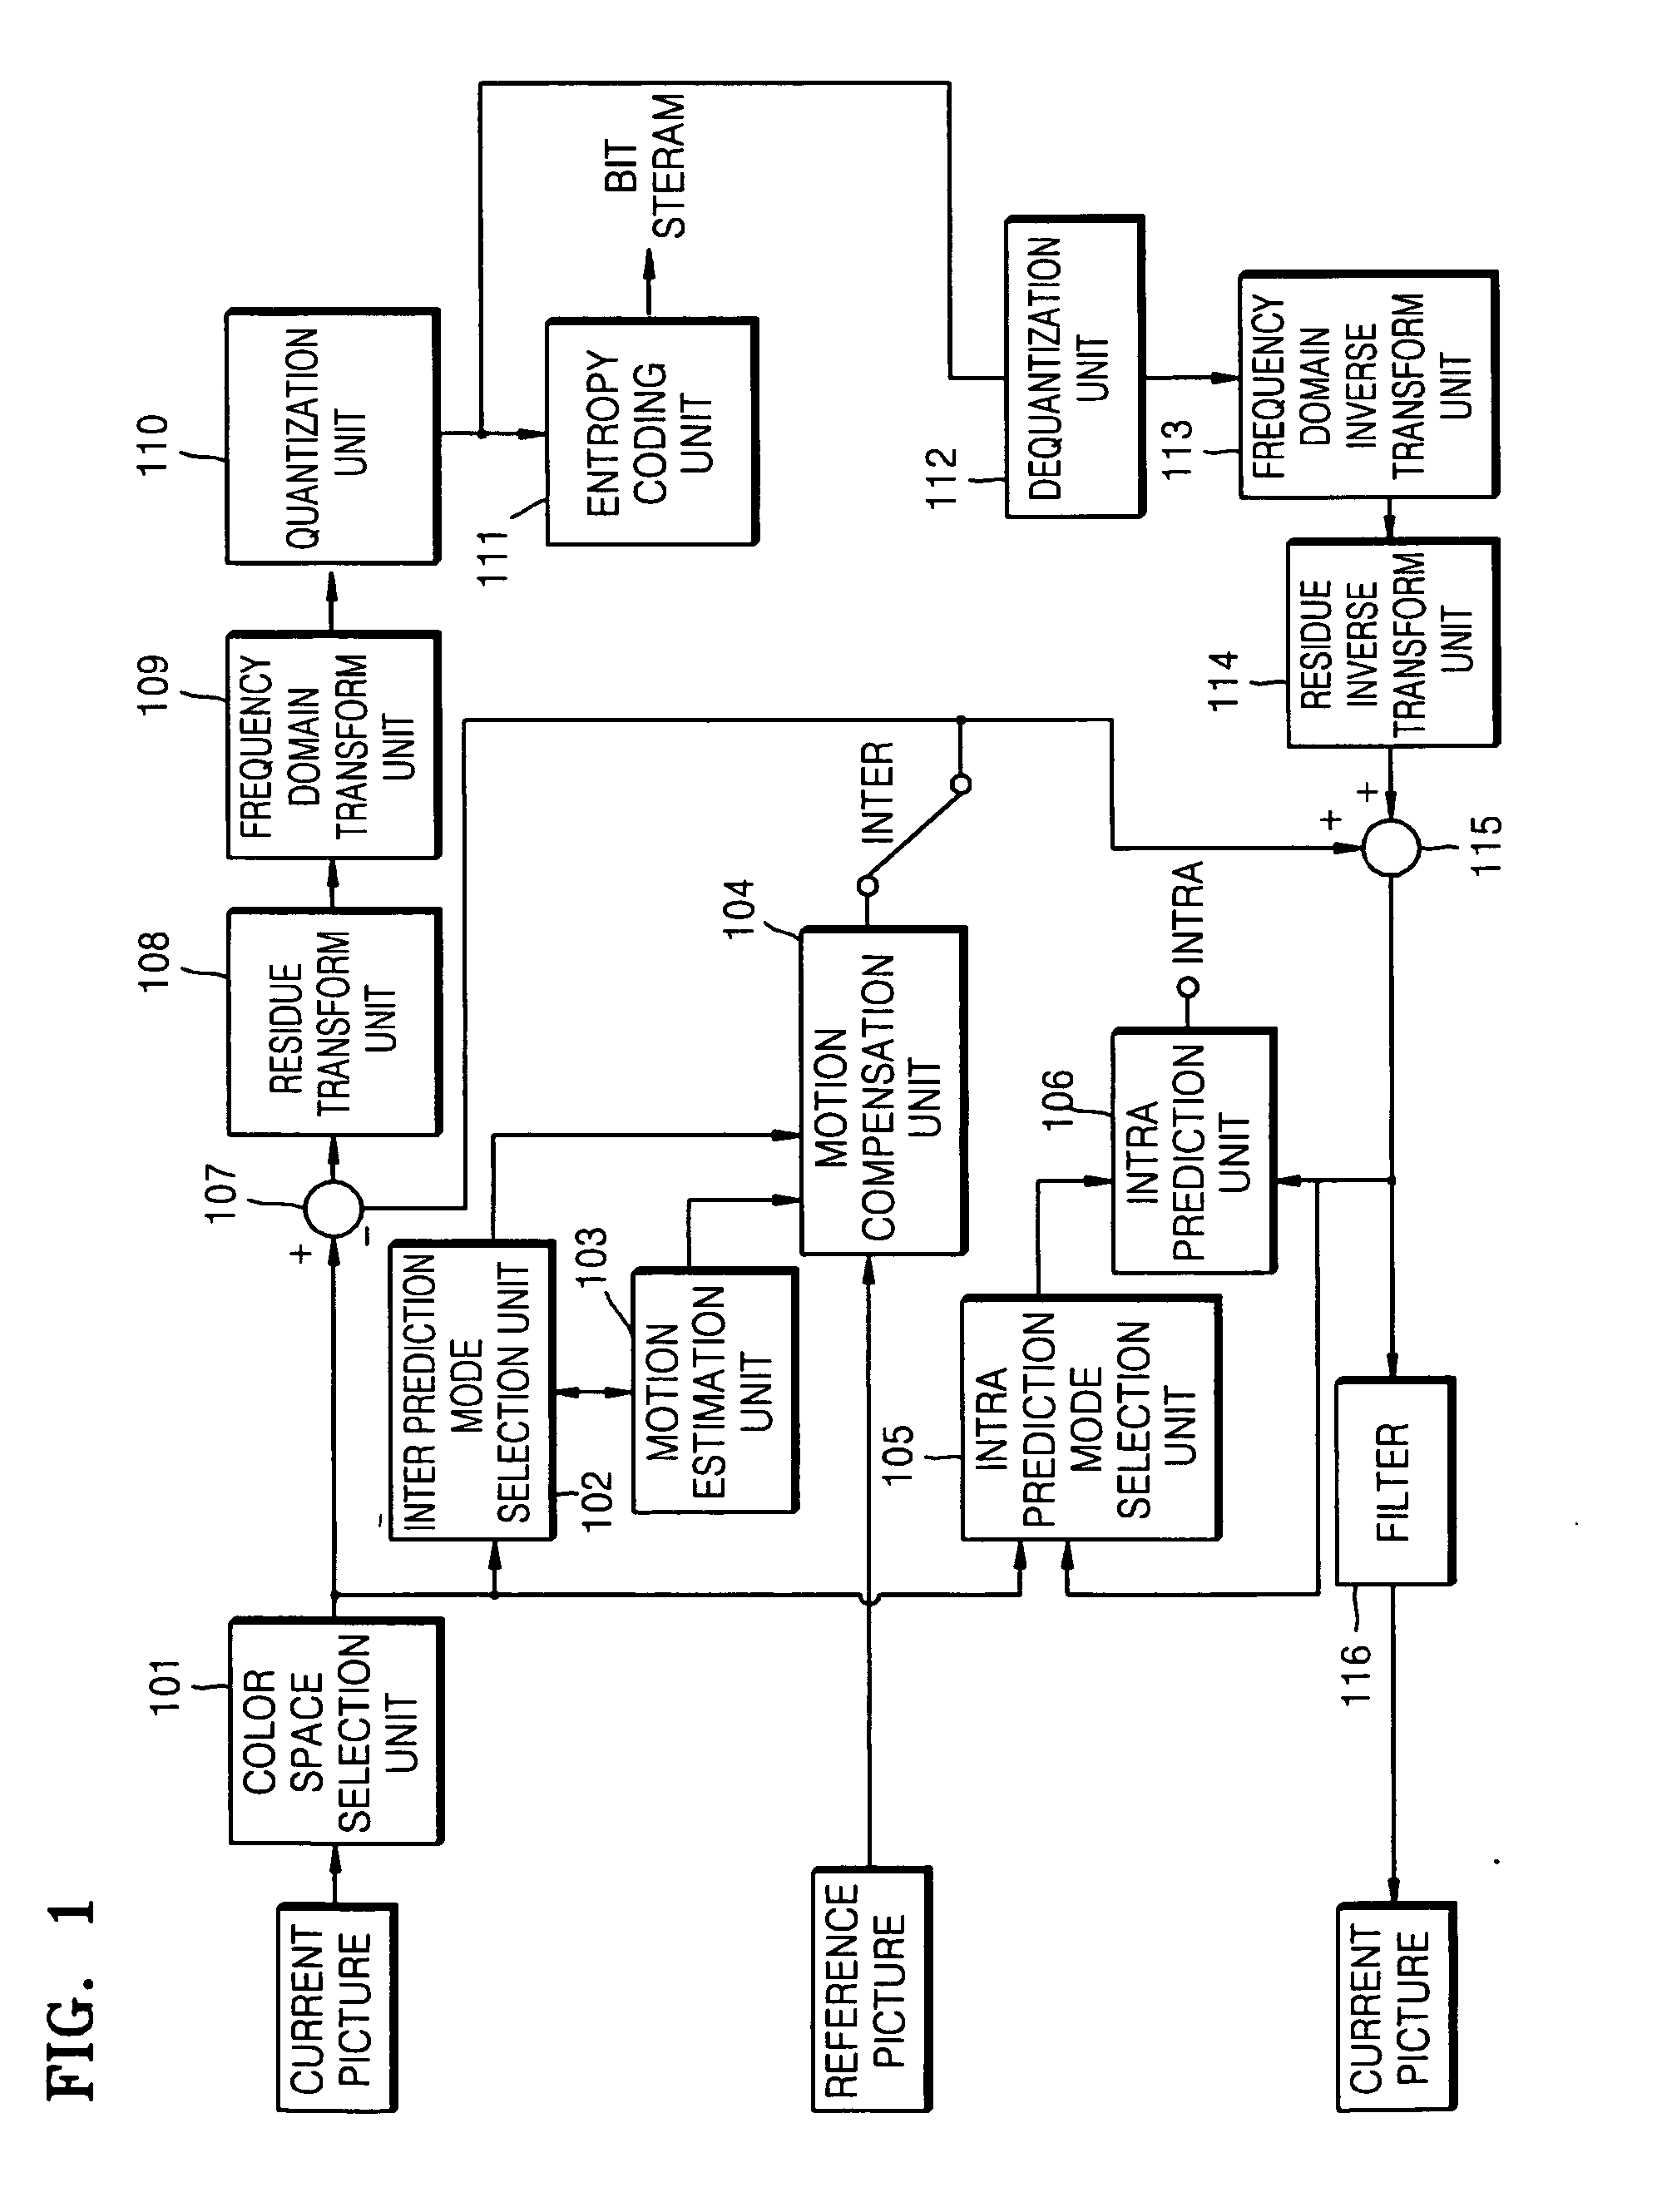 Moving picture coding/decoding method and apparatus